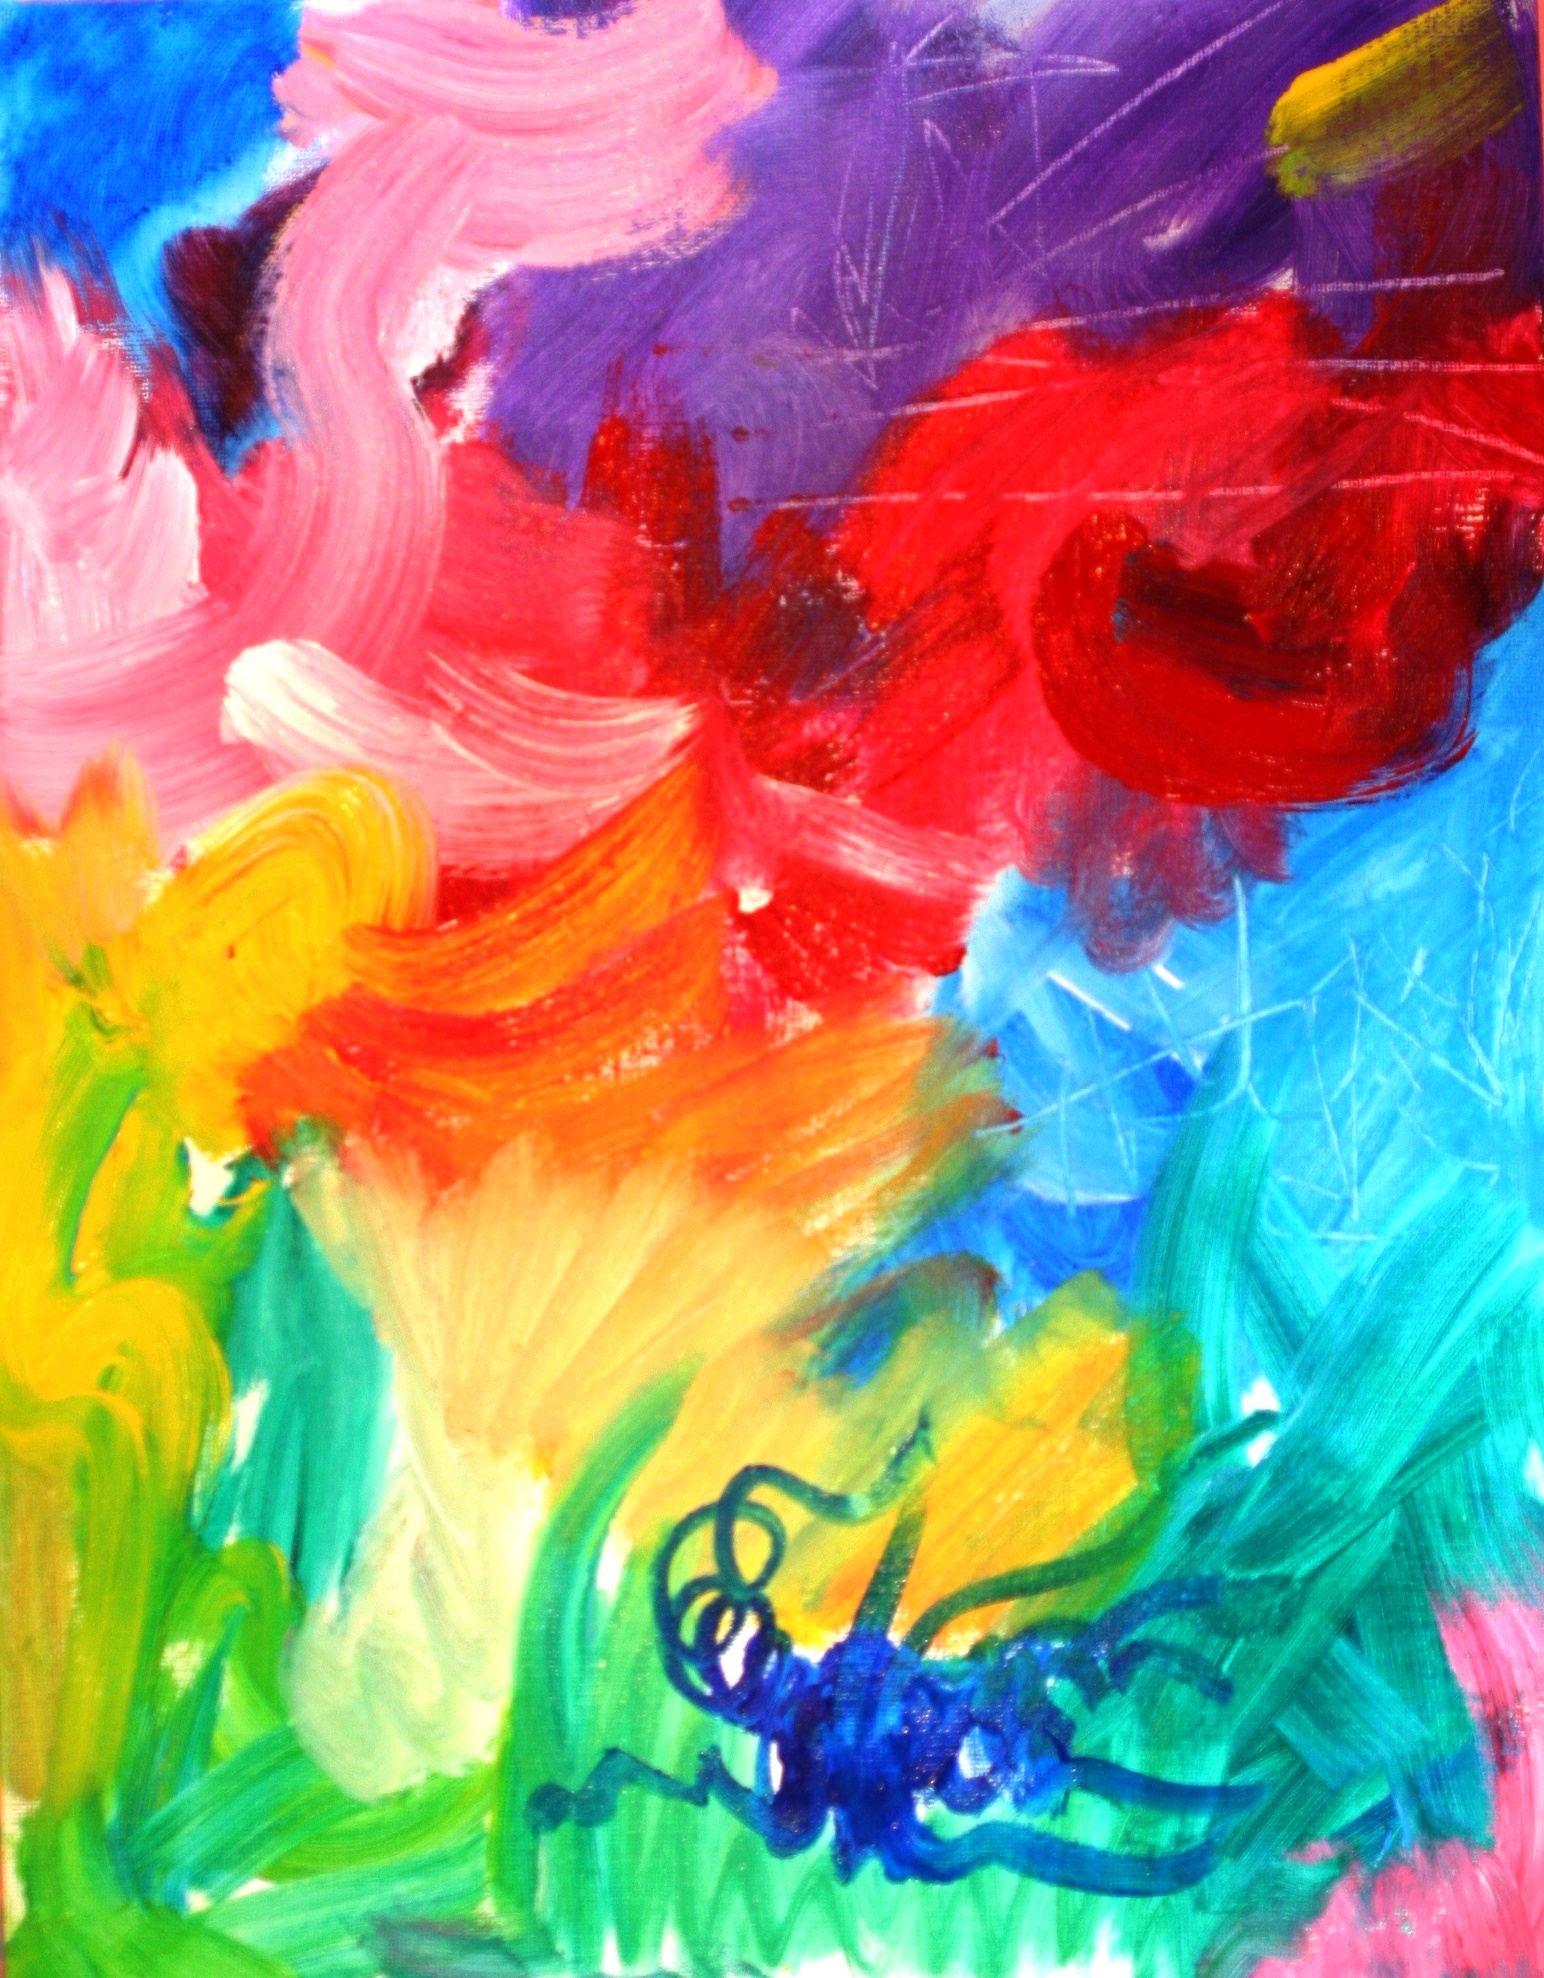 Abstract Art Challenges Children's Imaginative Vision - Abrakadoodle